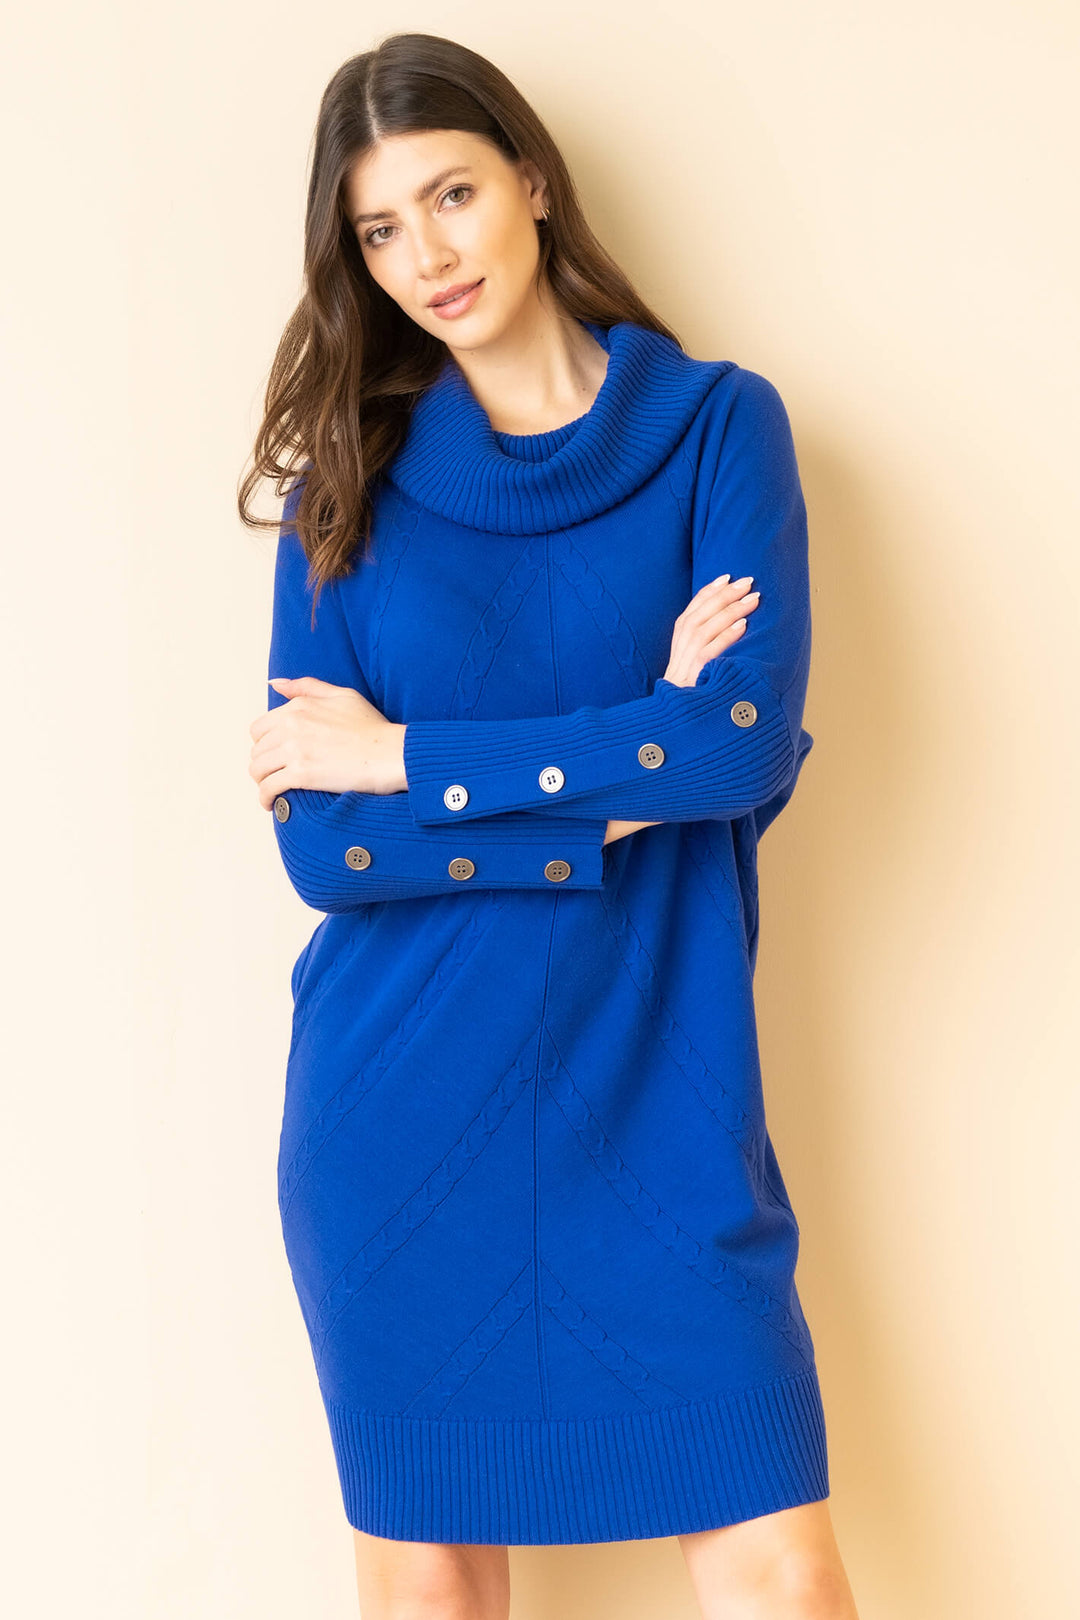 Marble Fashion 7184 210 Royal Blue Cowl Neck Knit Dresses - Experence Boutique